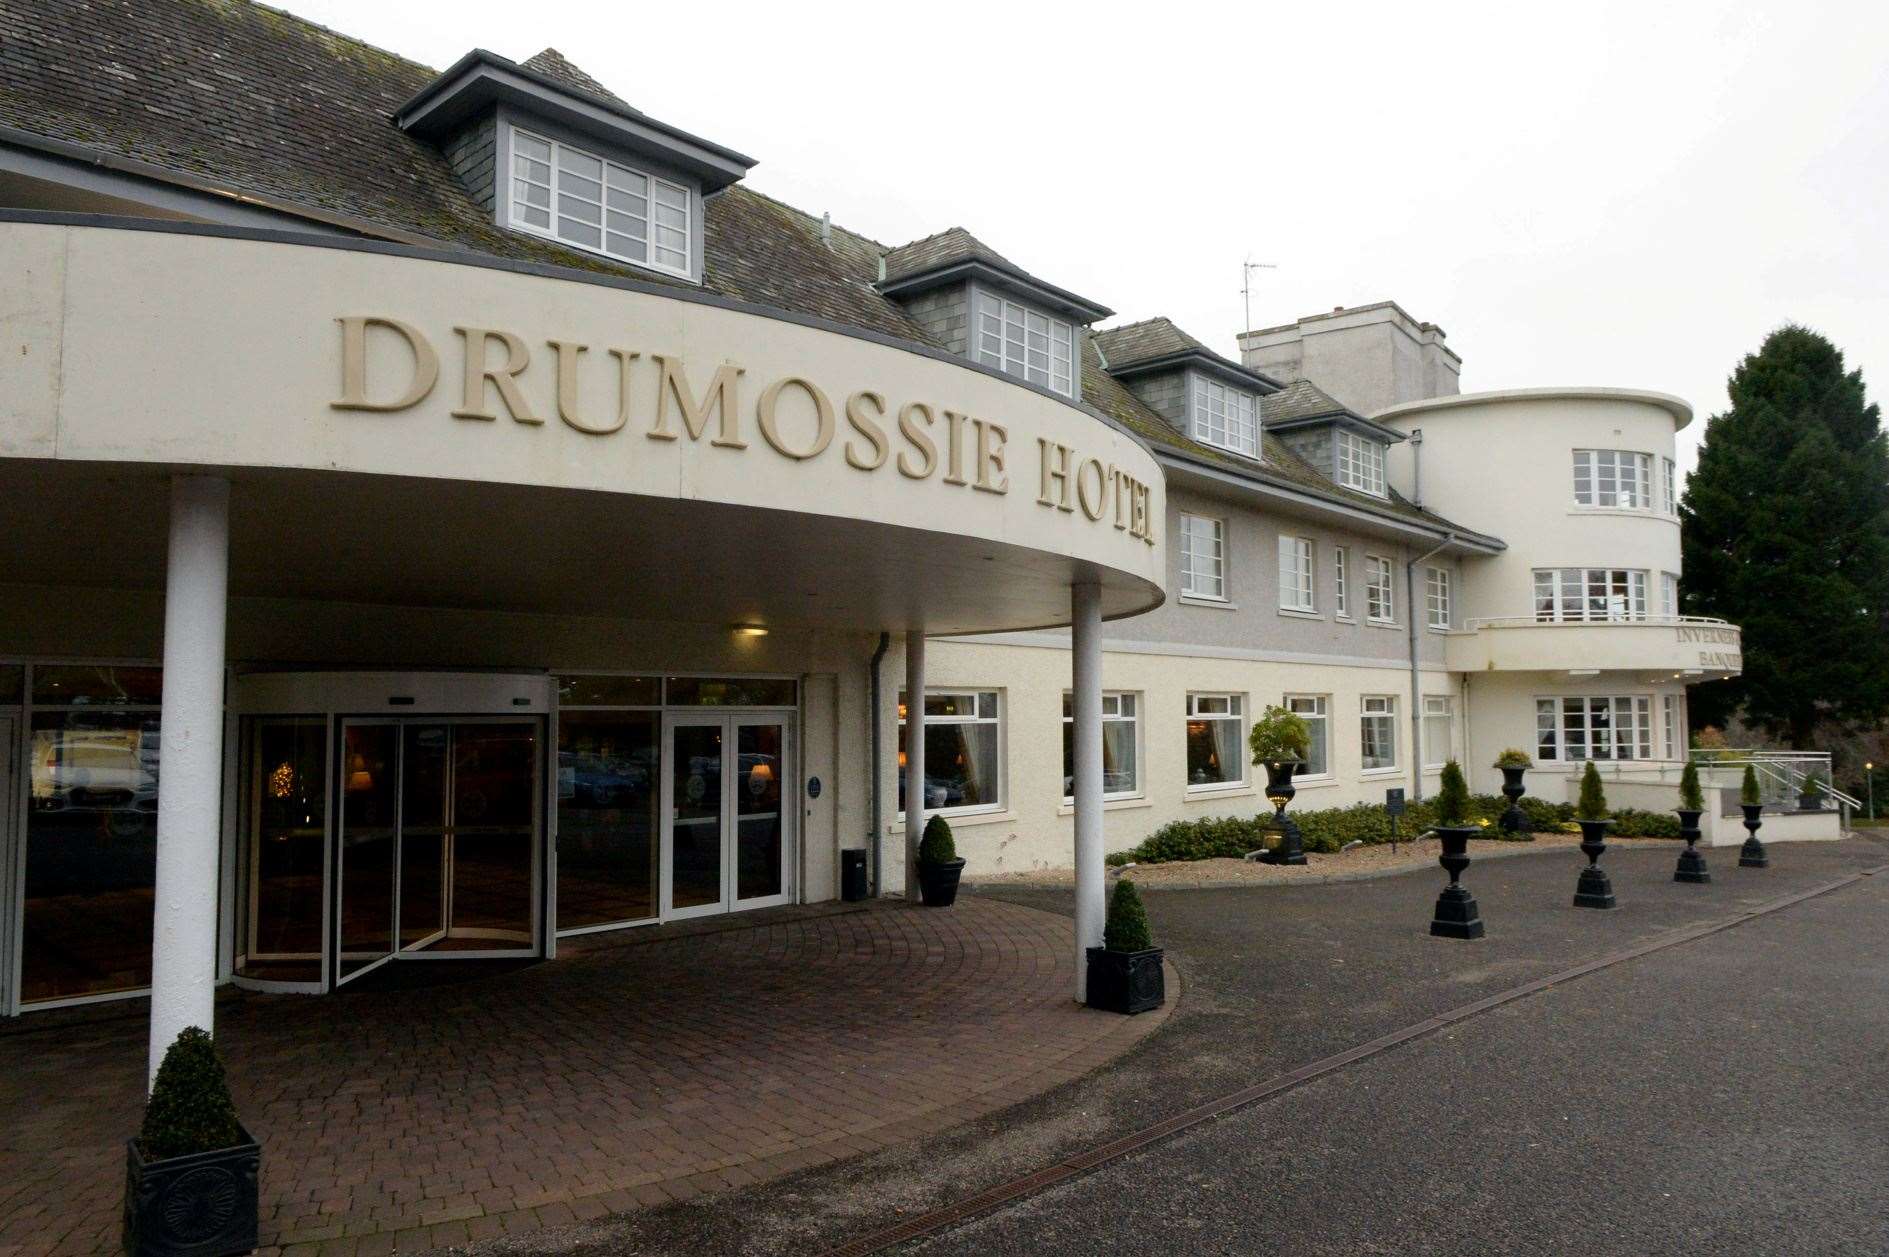 The Drumossie Hotel will play host to the black tie event this November. Picture: James Mackenzie.